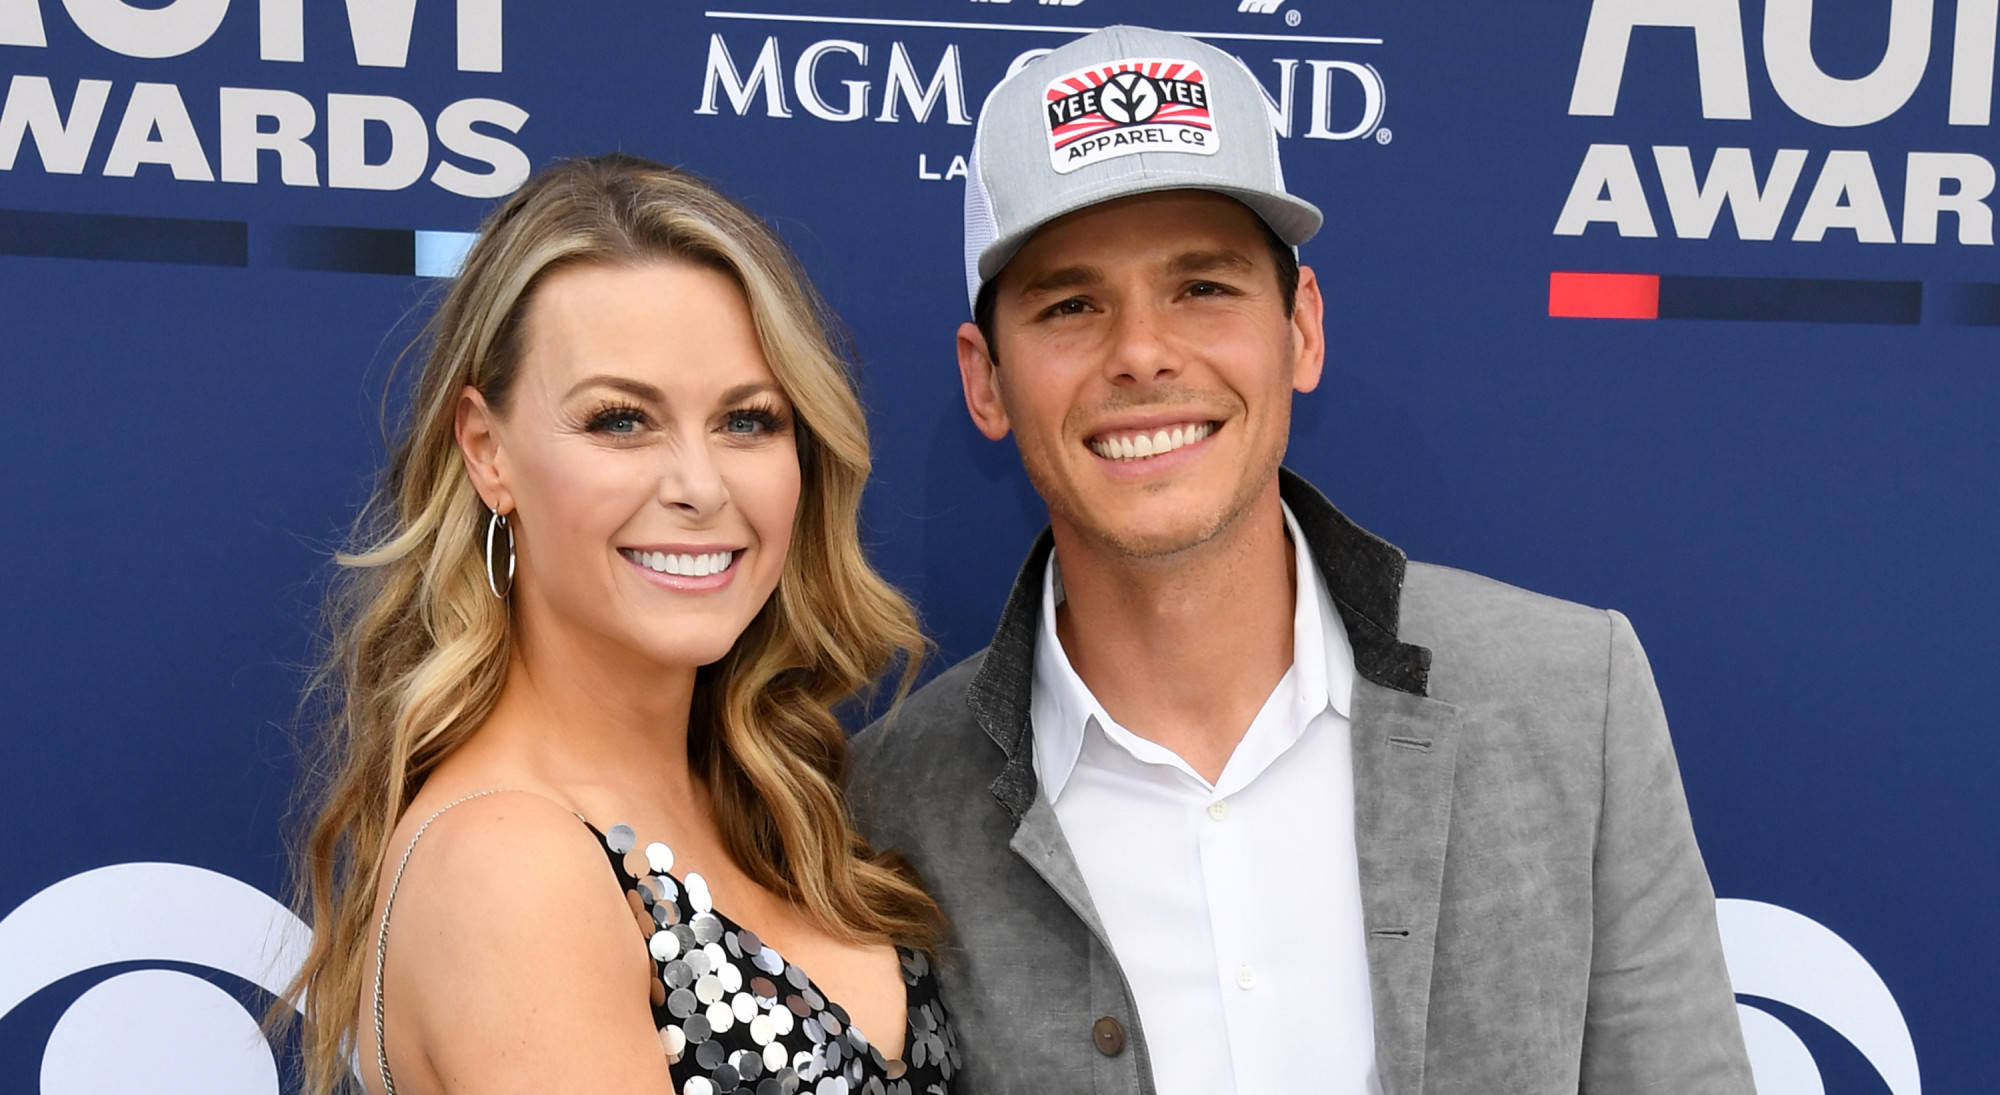 ‘Everything Reminds Me of Him’: Granger Smith’s Wife Amber Posts Heartbreaking Update After Son’s Death